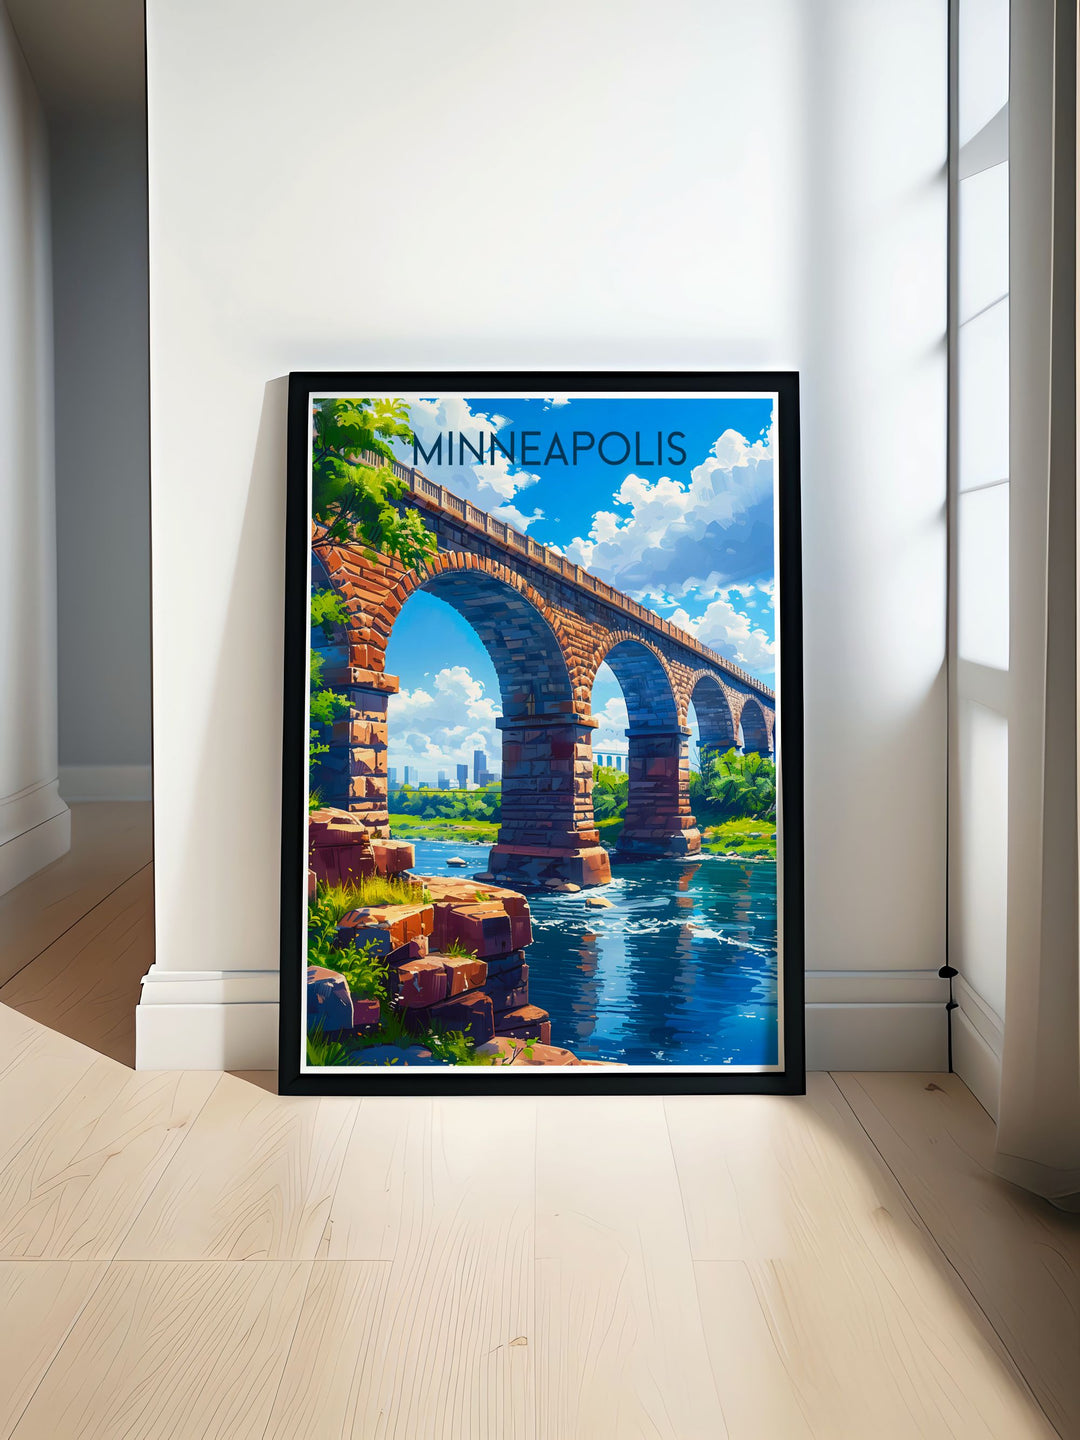 Featuring the iconic skyline and historic bridge of Minneapolis, this poster showcases the citys inviting landscapes, perfect for those who cherish urban and historic destinations.